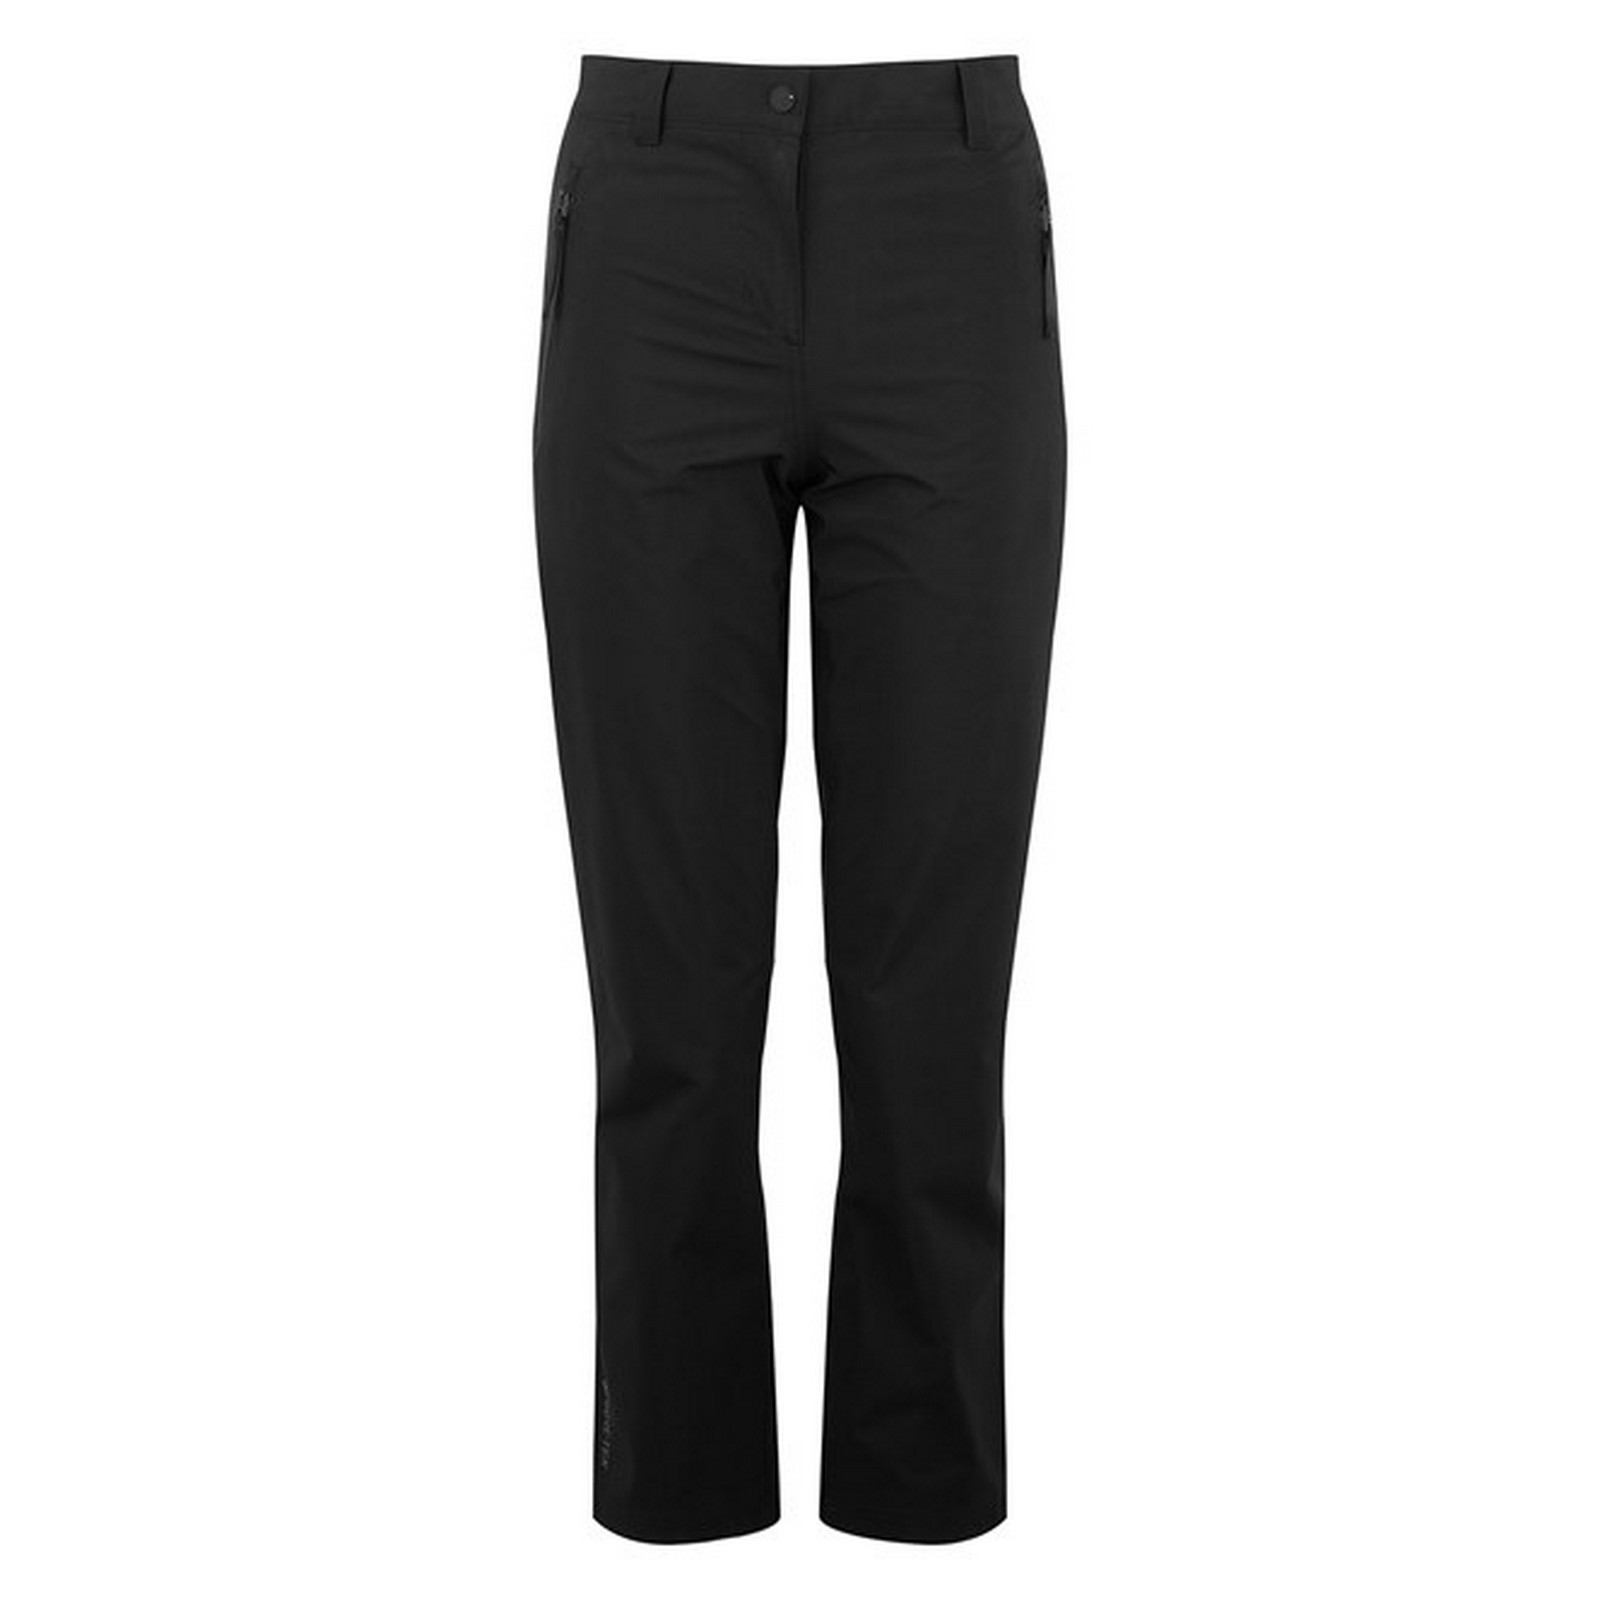 Craghoppers Expert Gore-Tex trousers | WISE Worksafe